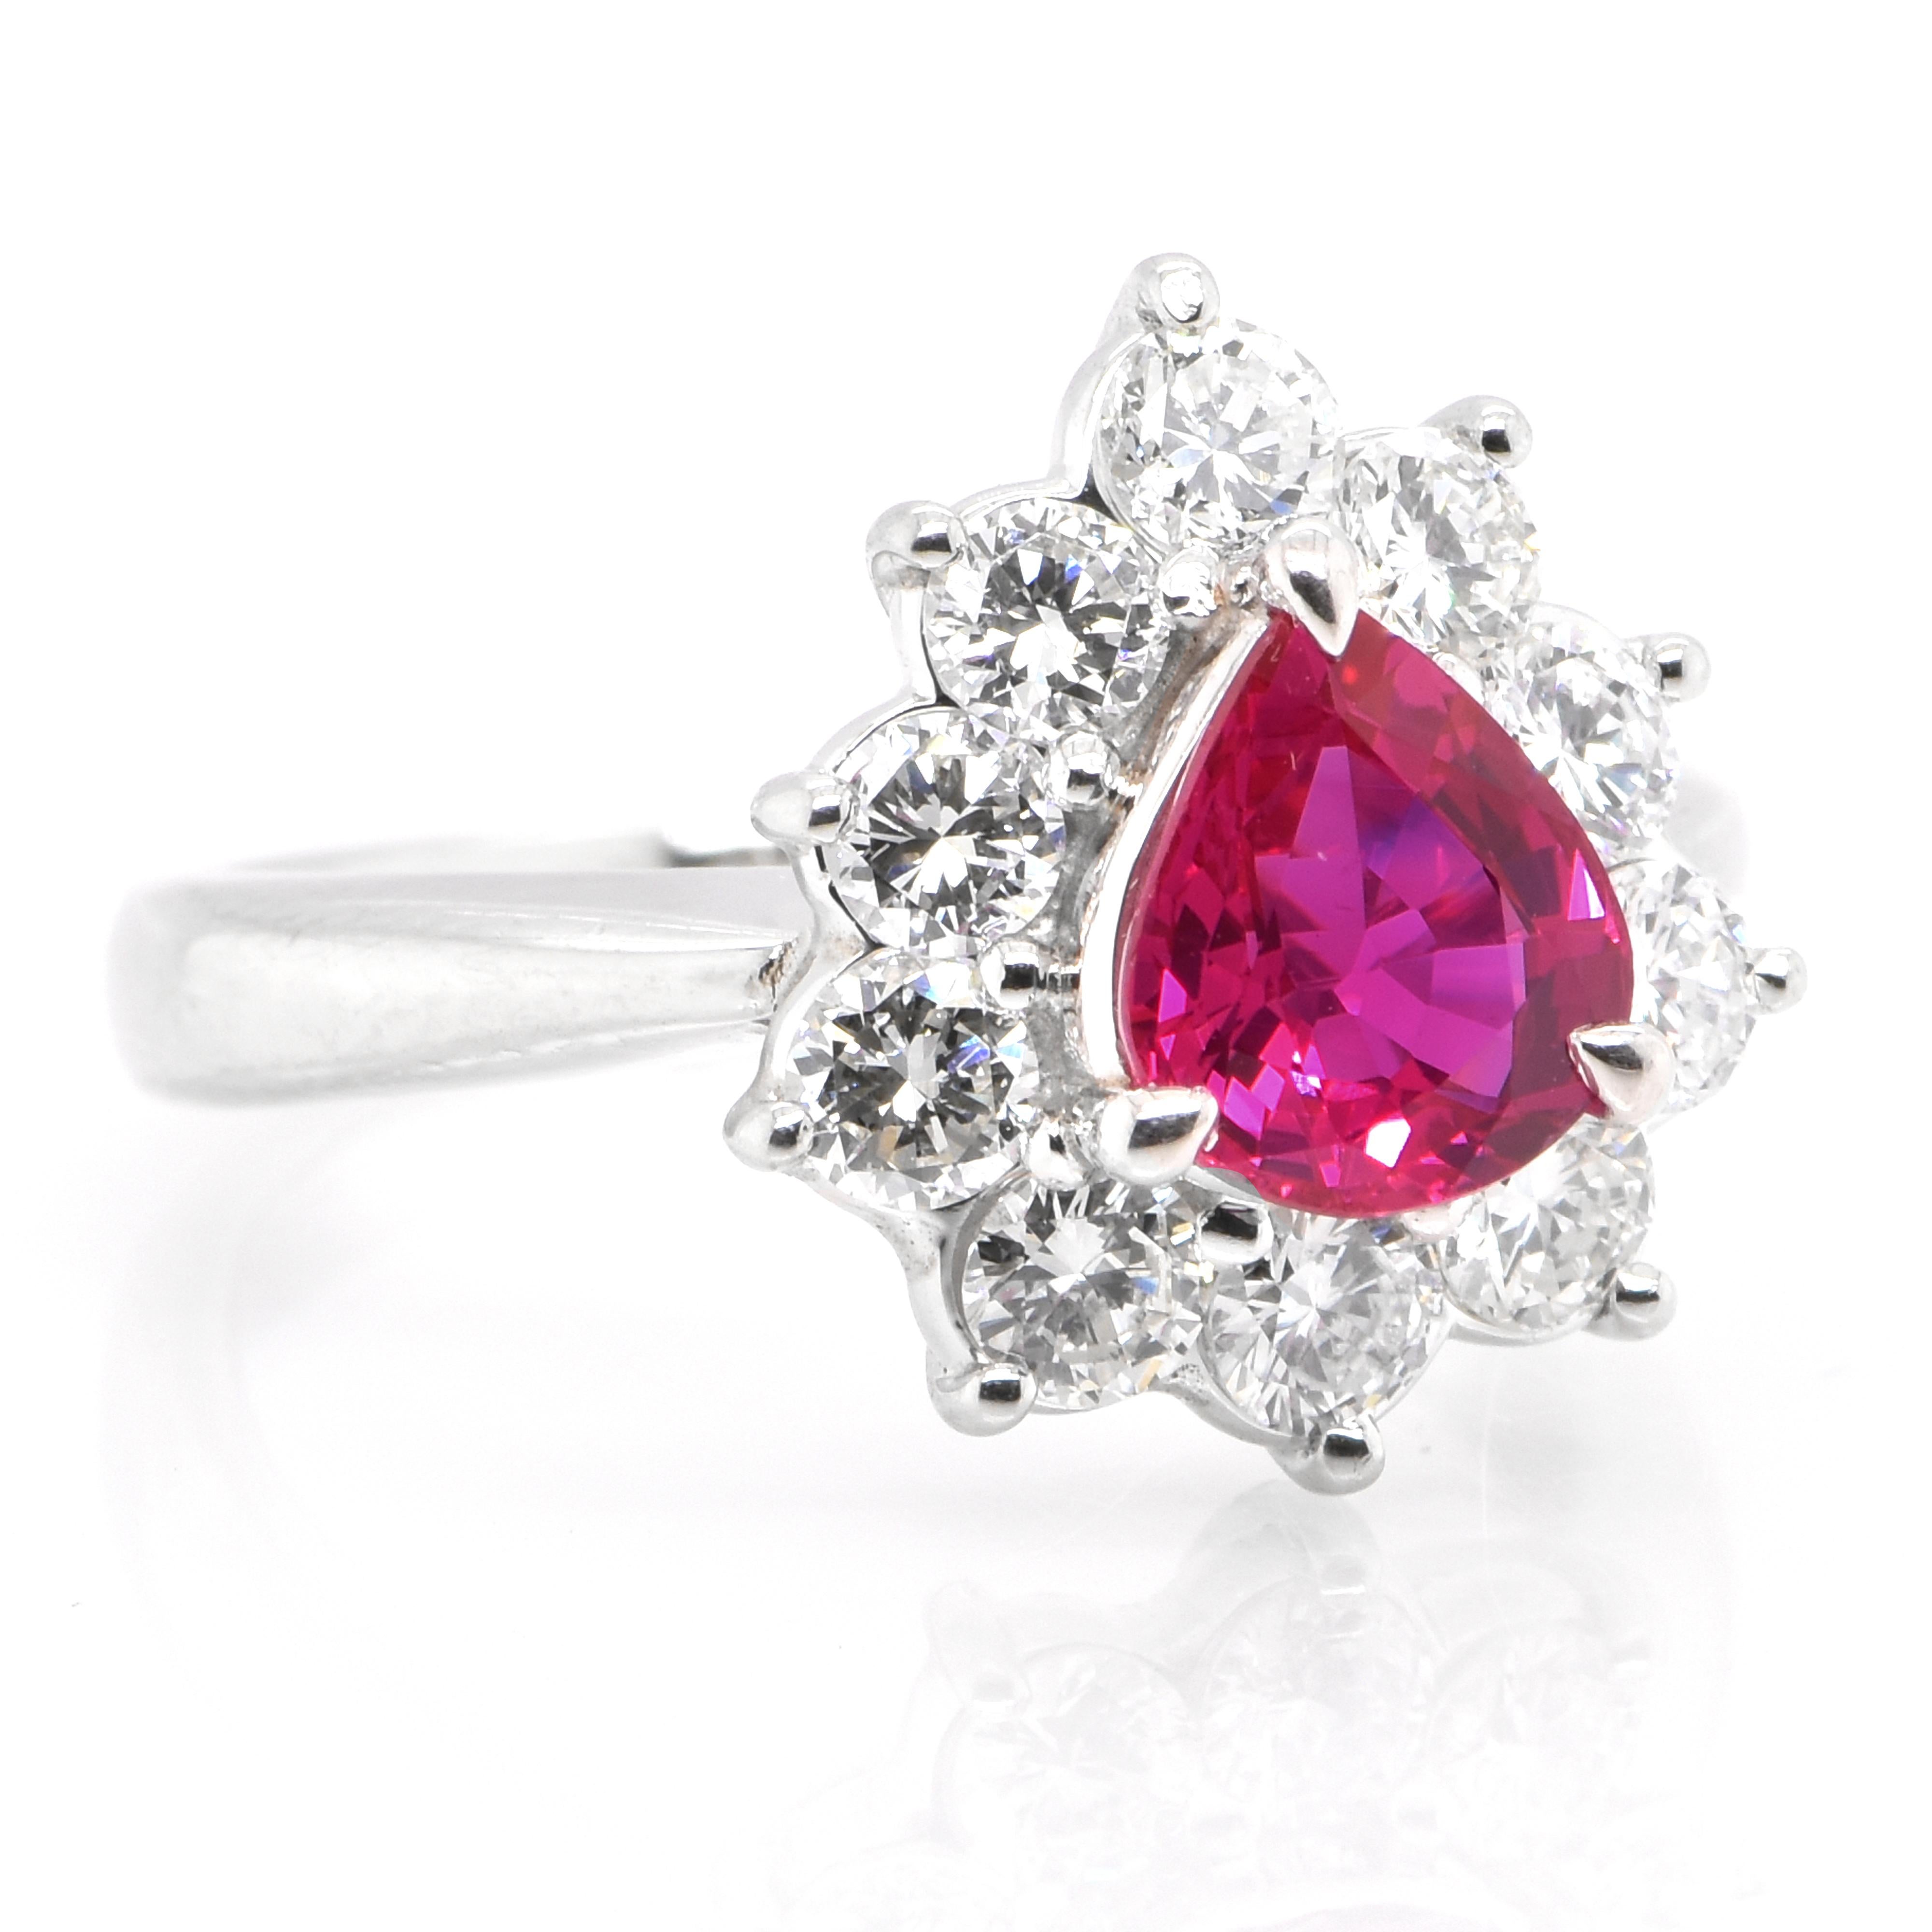 Modern 1.11 Carat Natural Pear Cut Ruby and Diamond Ring Set in Platinum